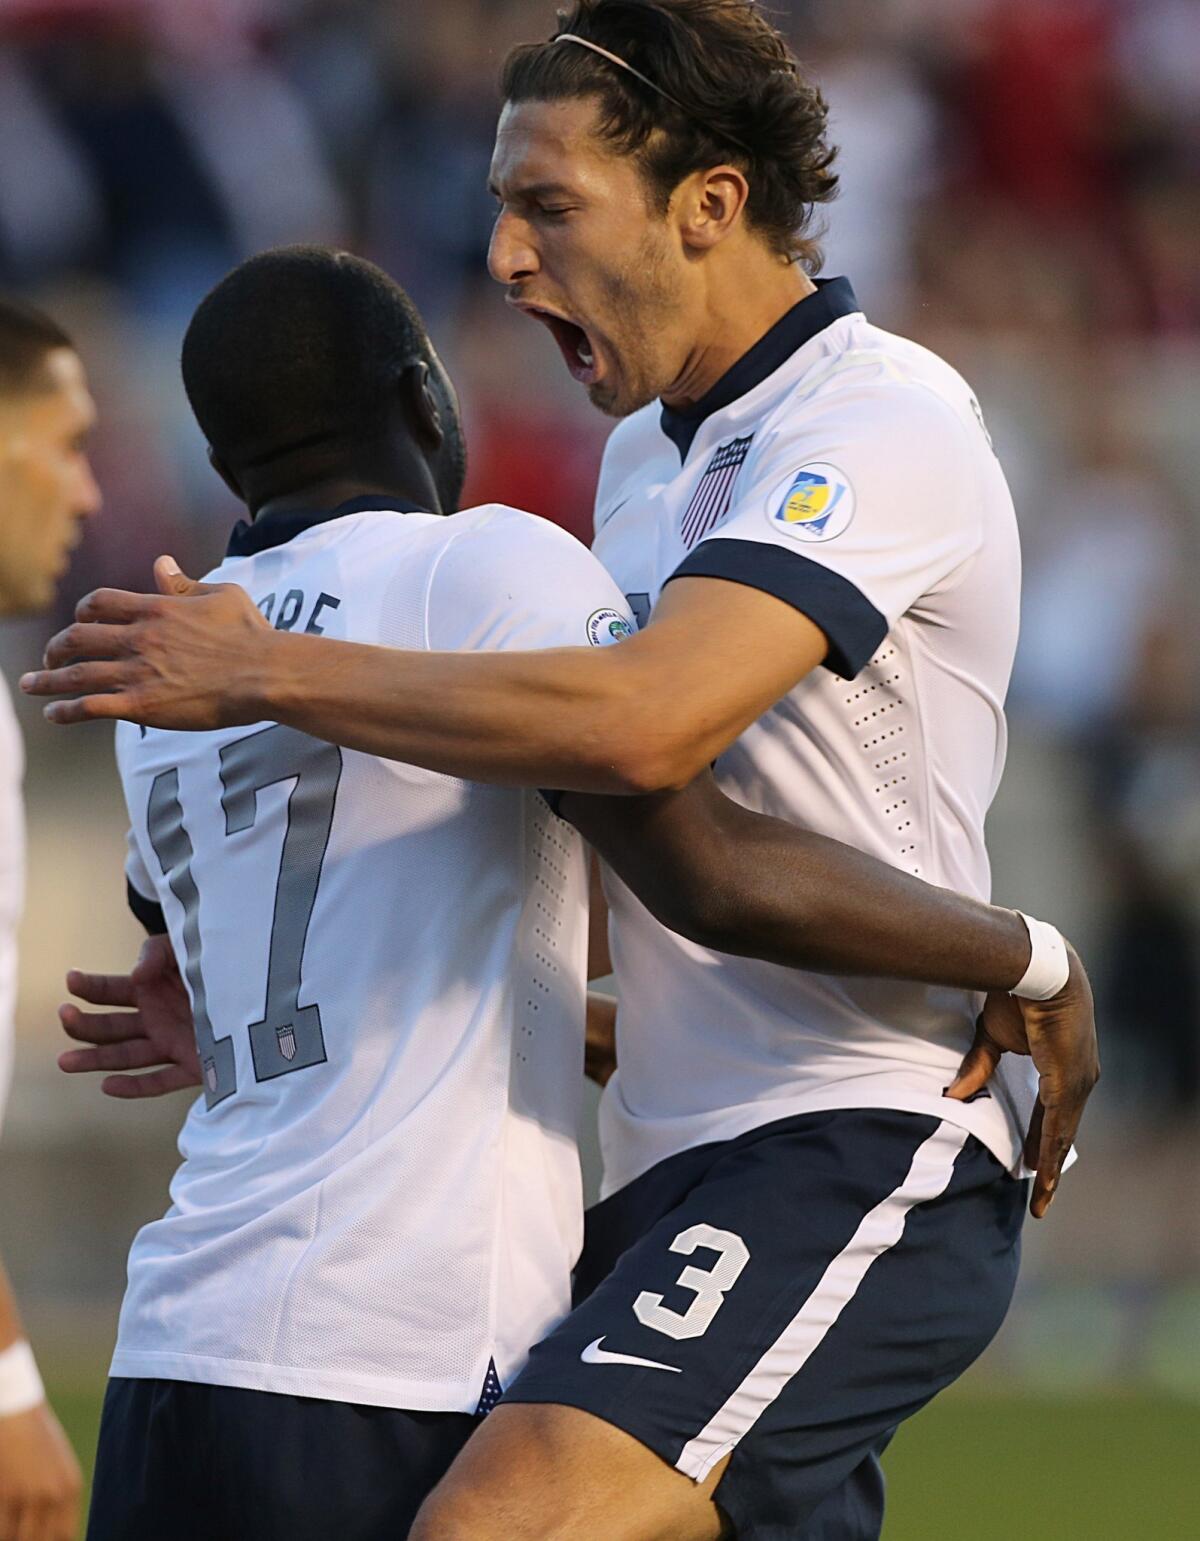 Omar Gonzalez, right, celebrates with teammate Jozy Altidore following a U.S. goal against Honduras during a World Cup qualifying match on June 18.